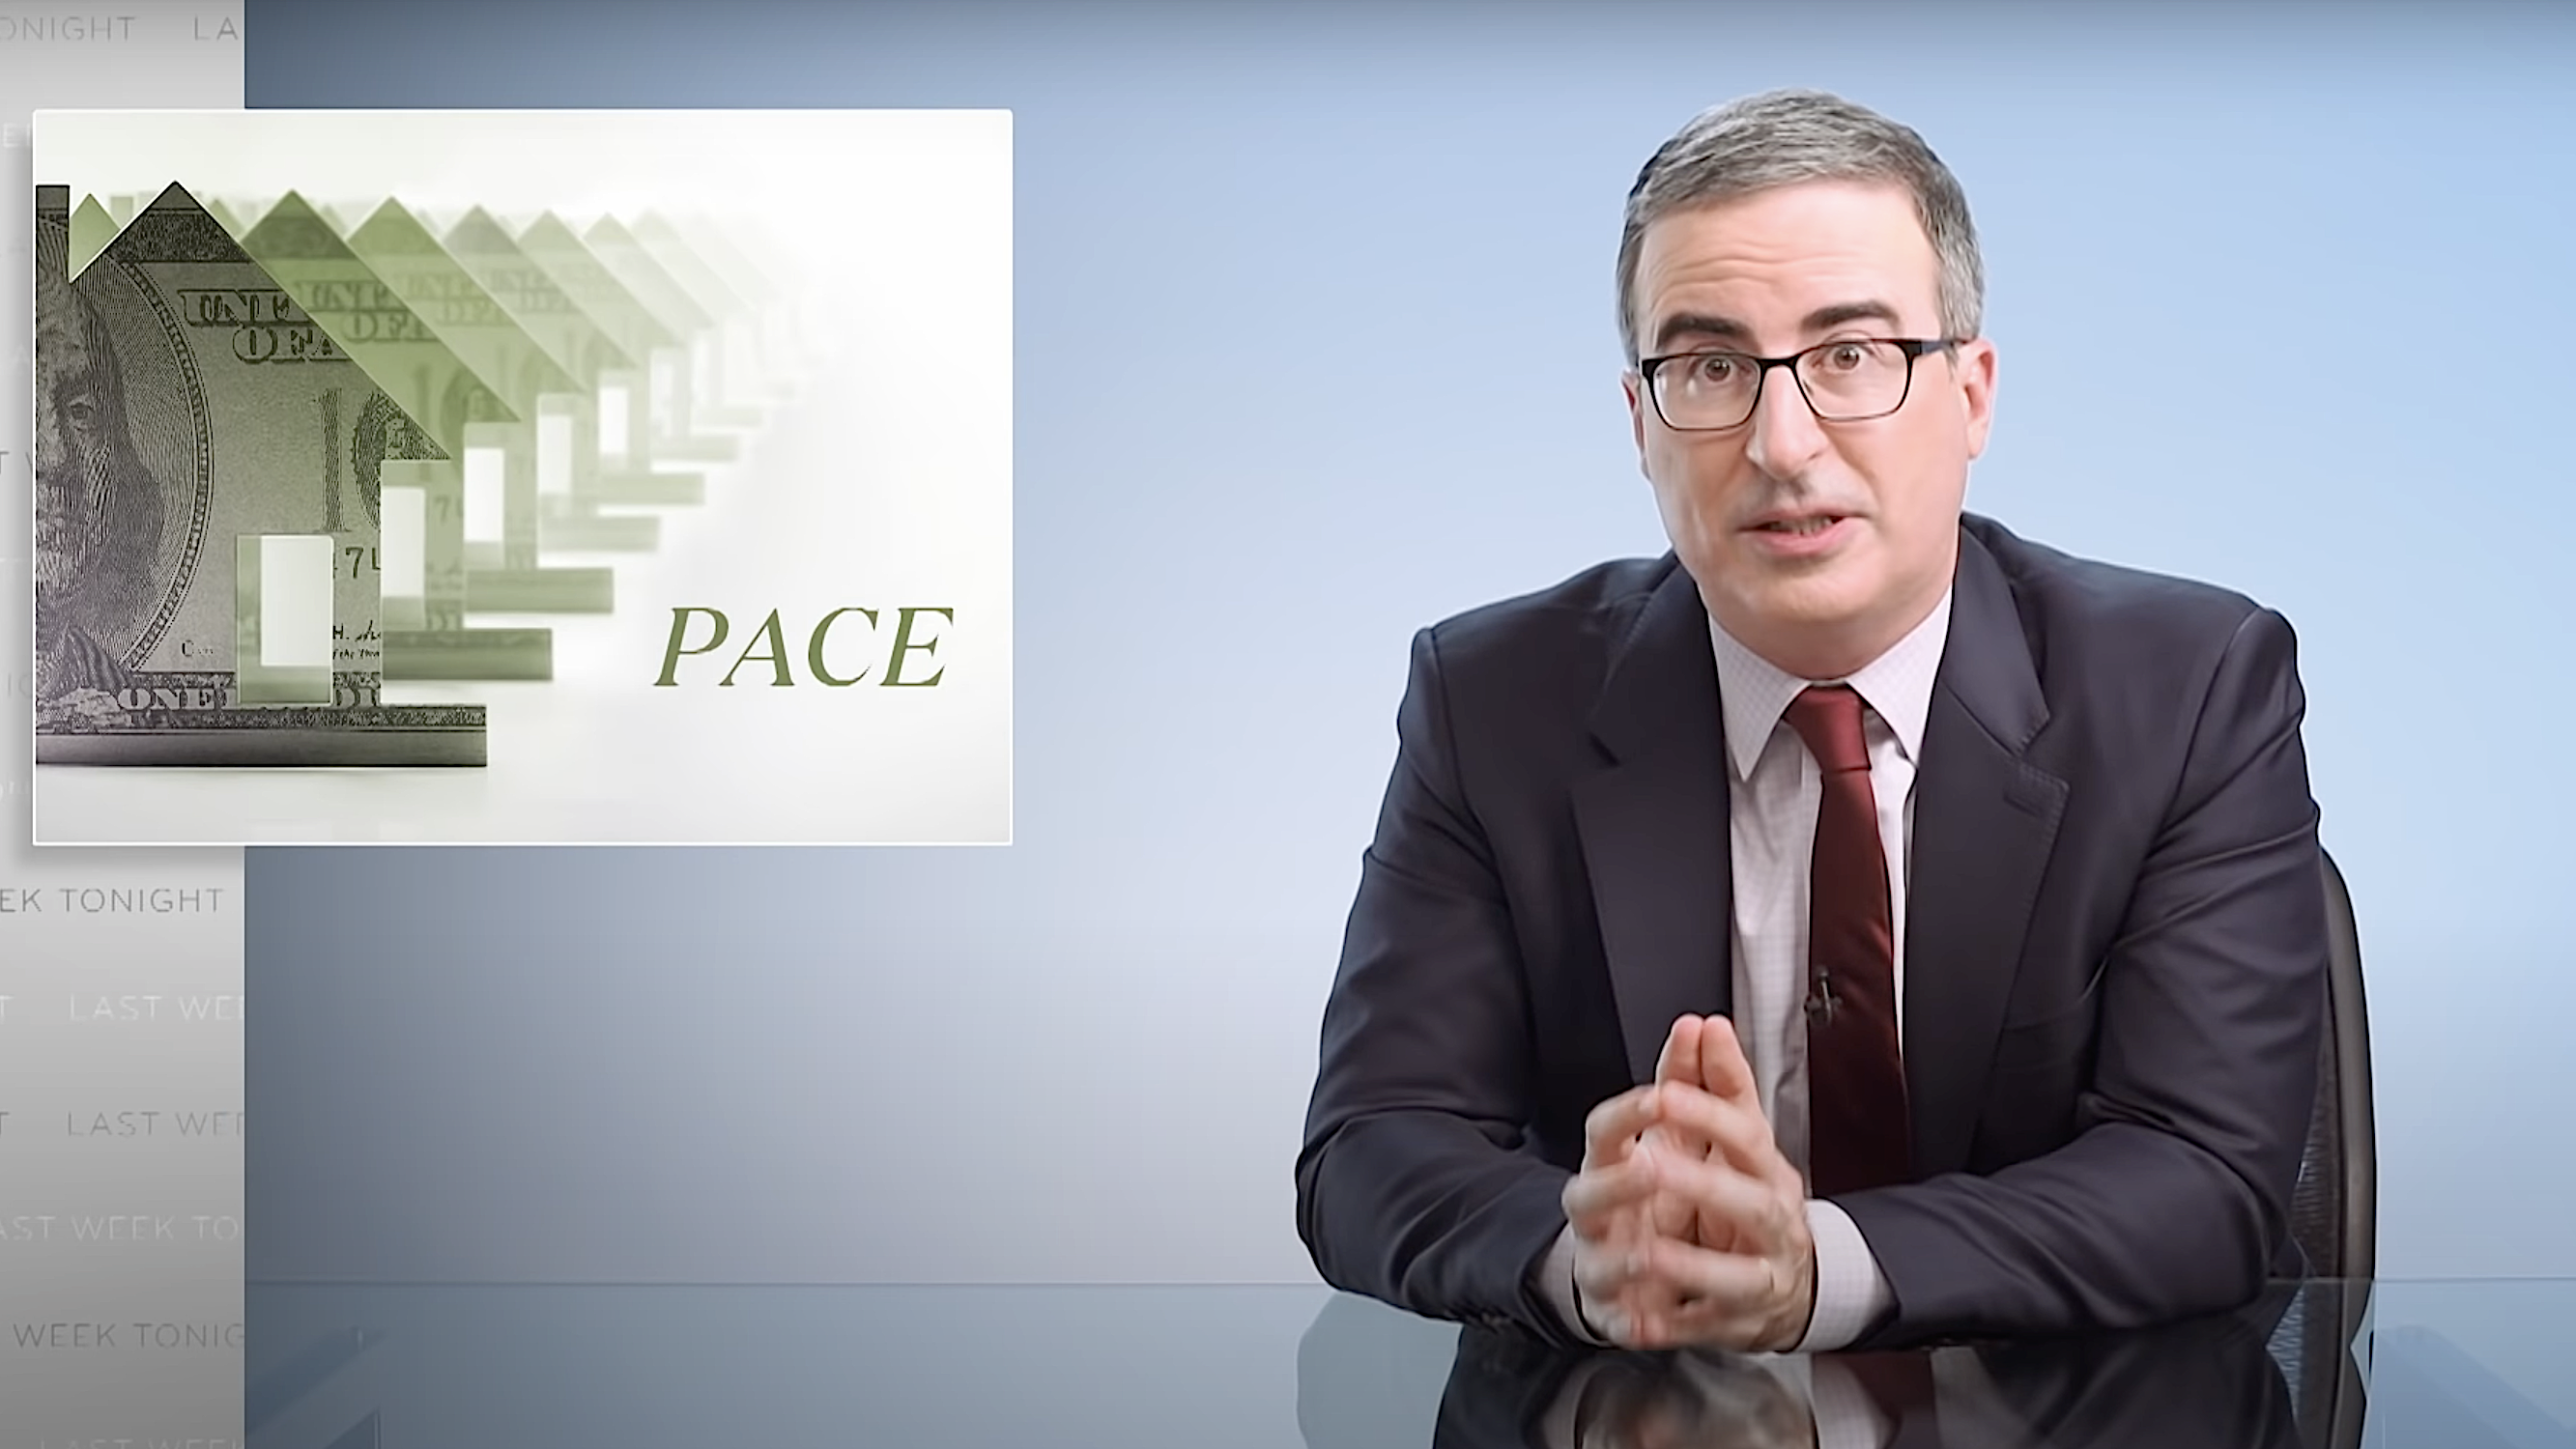 John Oliver warns homeowners about the perils of the "hippie capitalism" of PACE loans